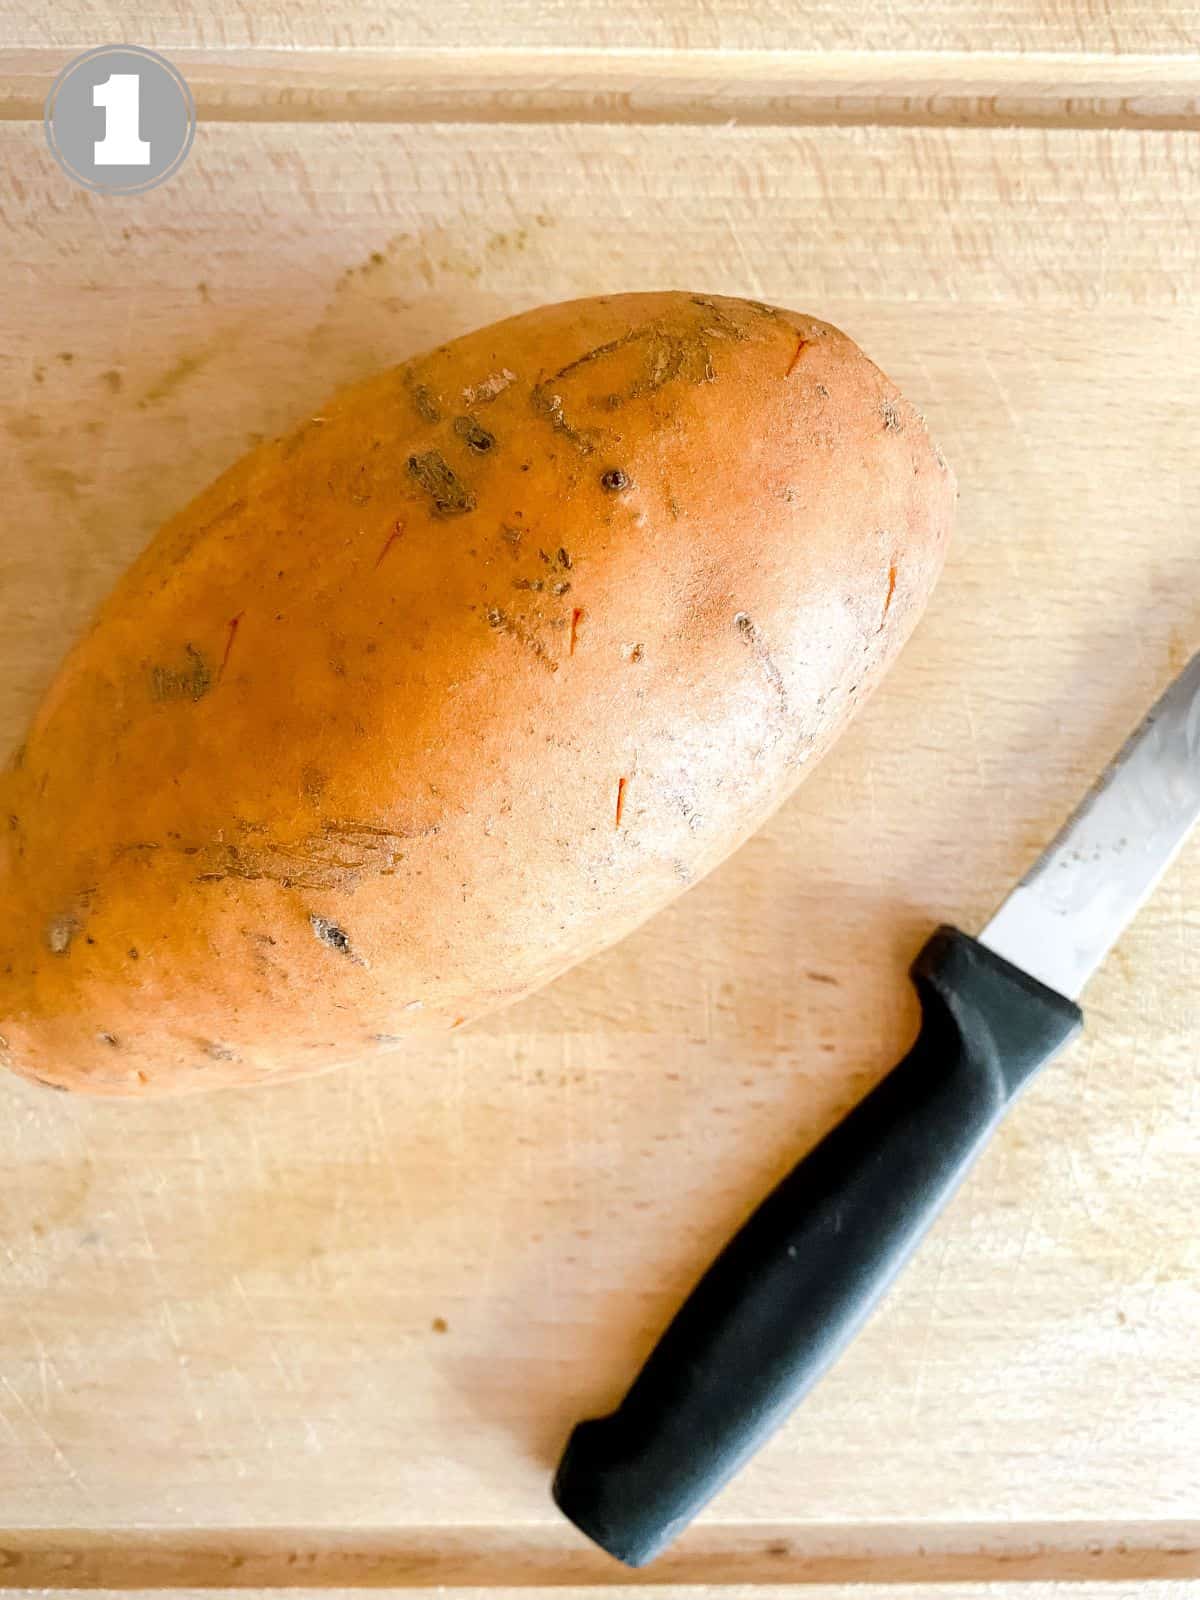 sweet potato and knife on a wooden chopping board labelled number one.